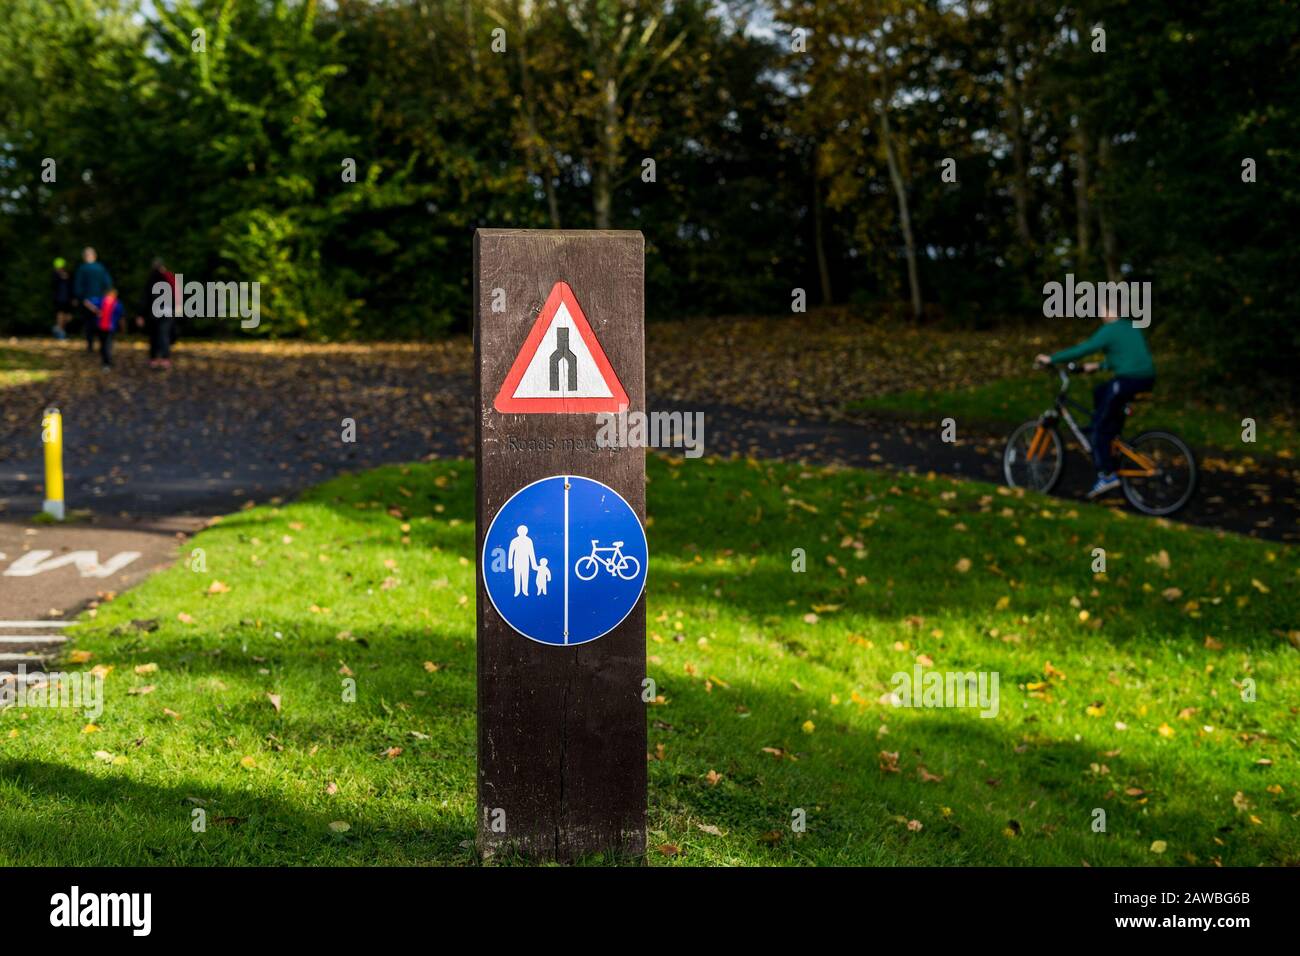 Bike and walking sign in park. Shared path for pedestrians and cyclists Stock Photo